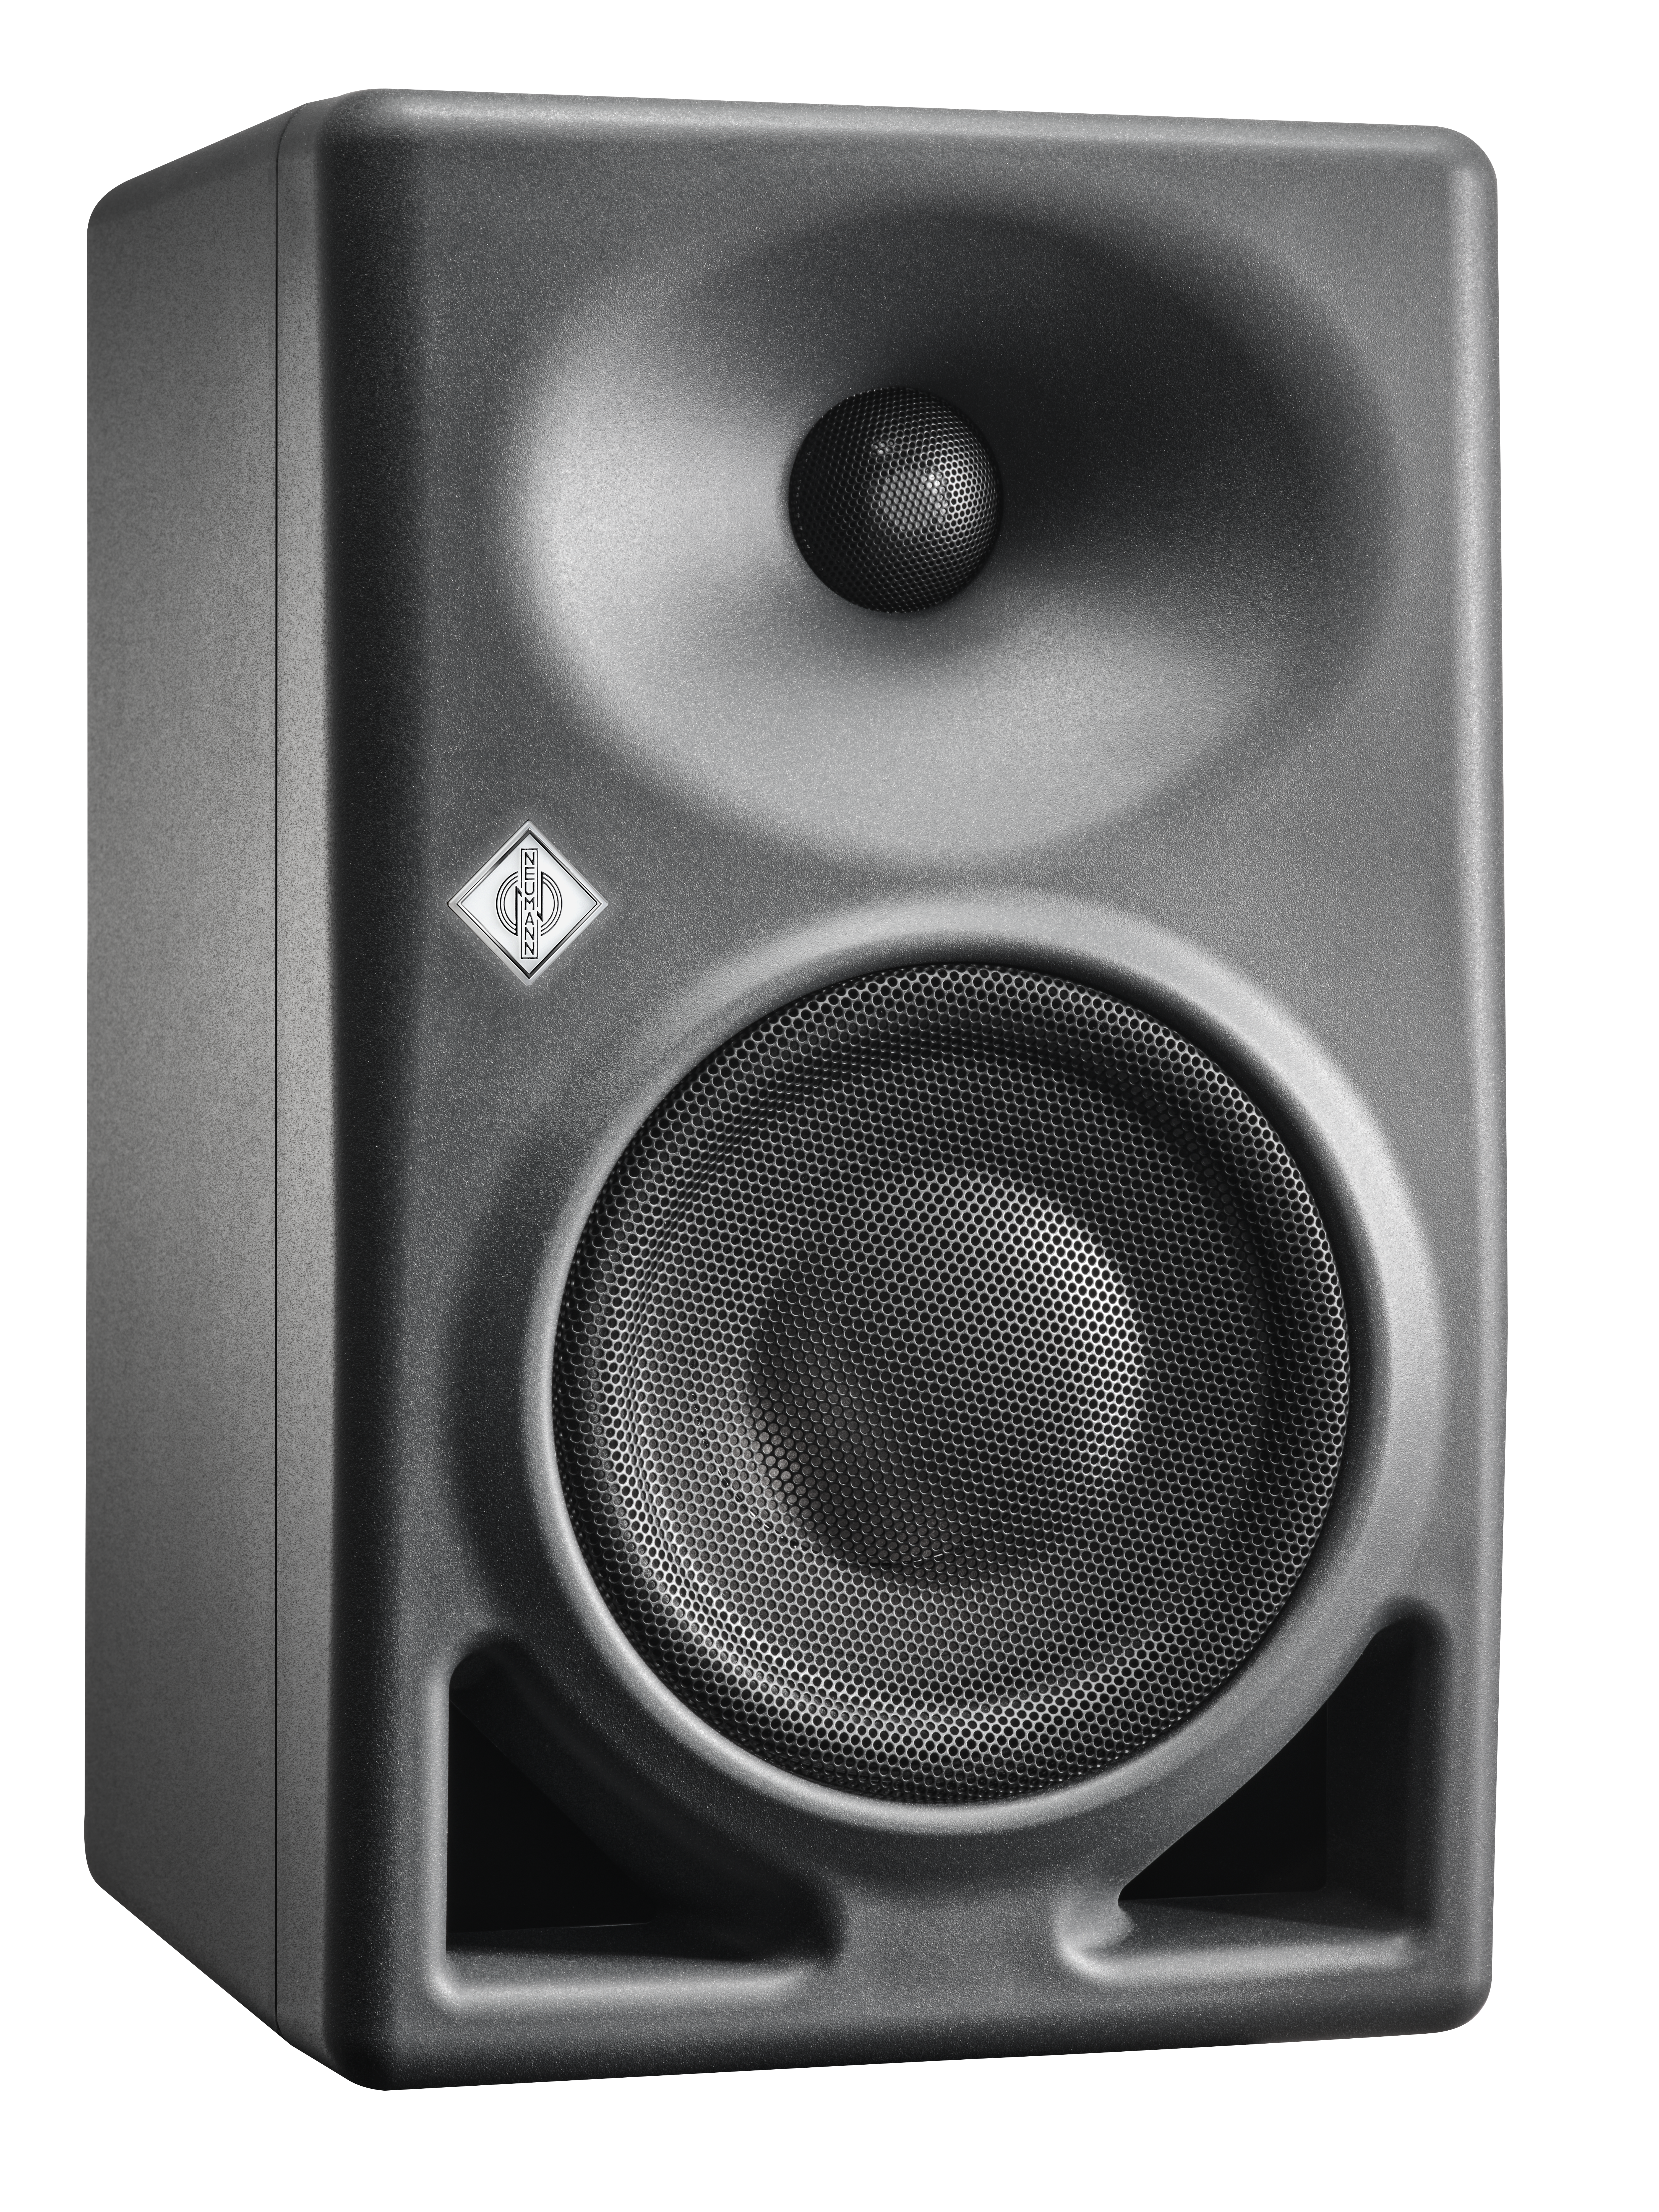 Neumann’s acclaimed studio monitor taken to a new level with deeper bass, higher resolution, and DSP power.